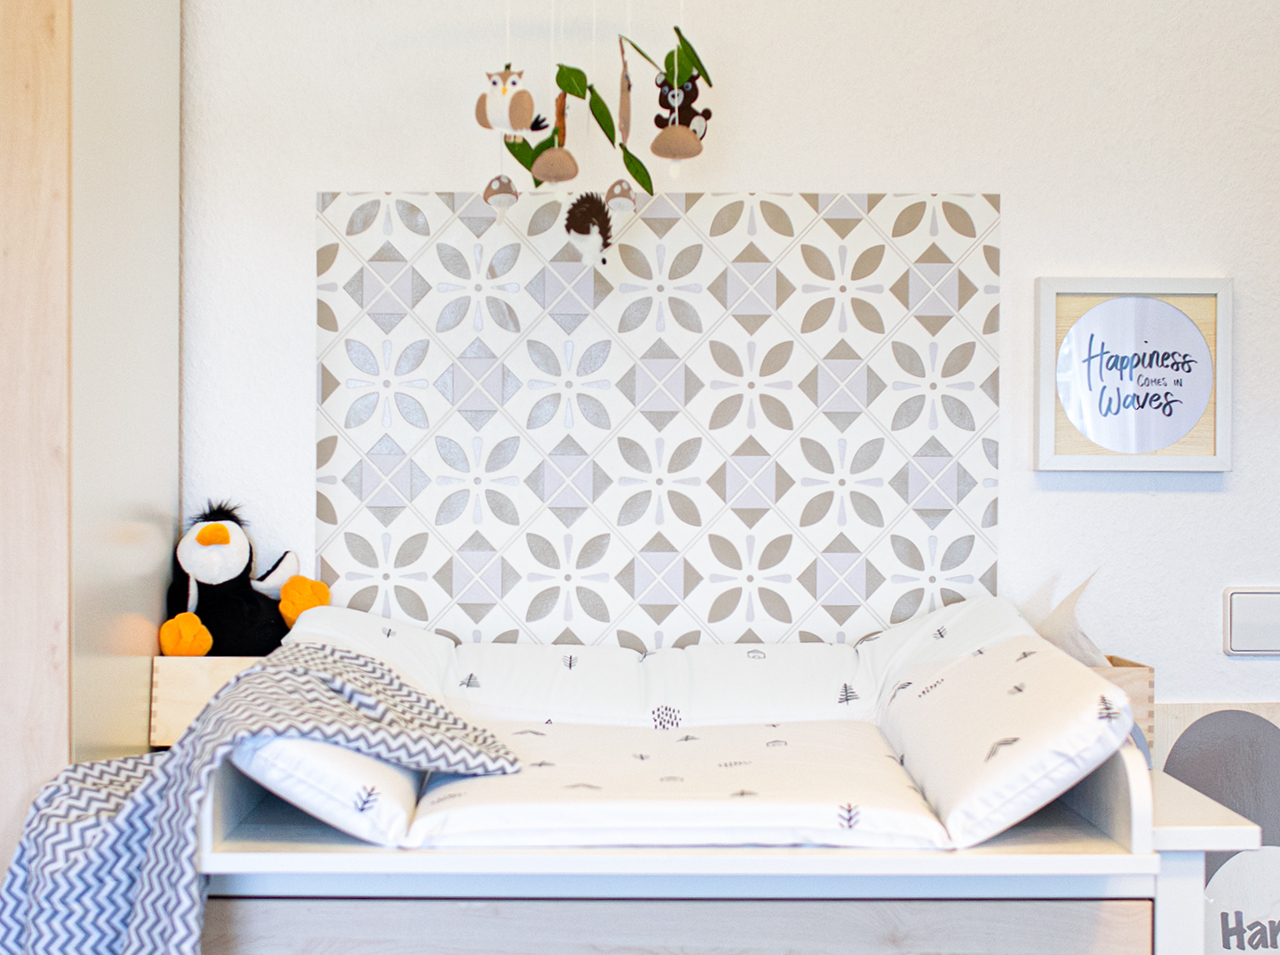 Above a dresser with a changing table attachment is wall paneling with an ornamental tile pattern in beige.